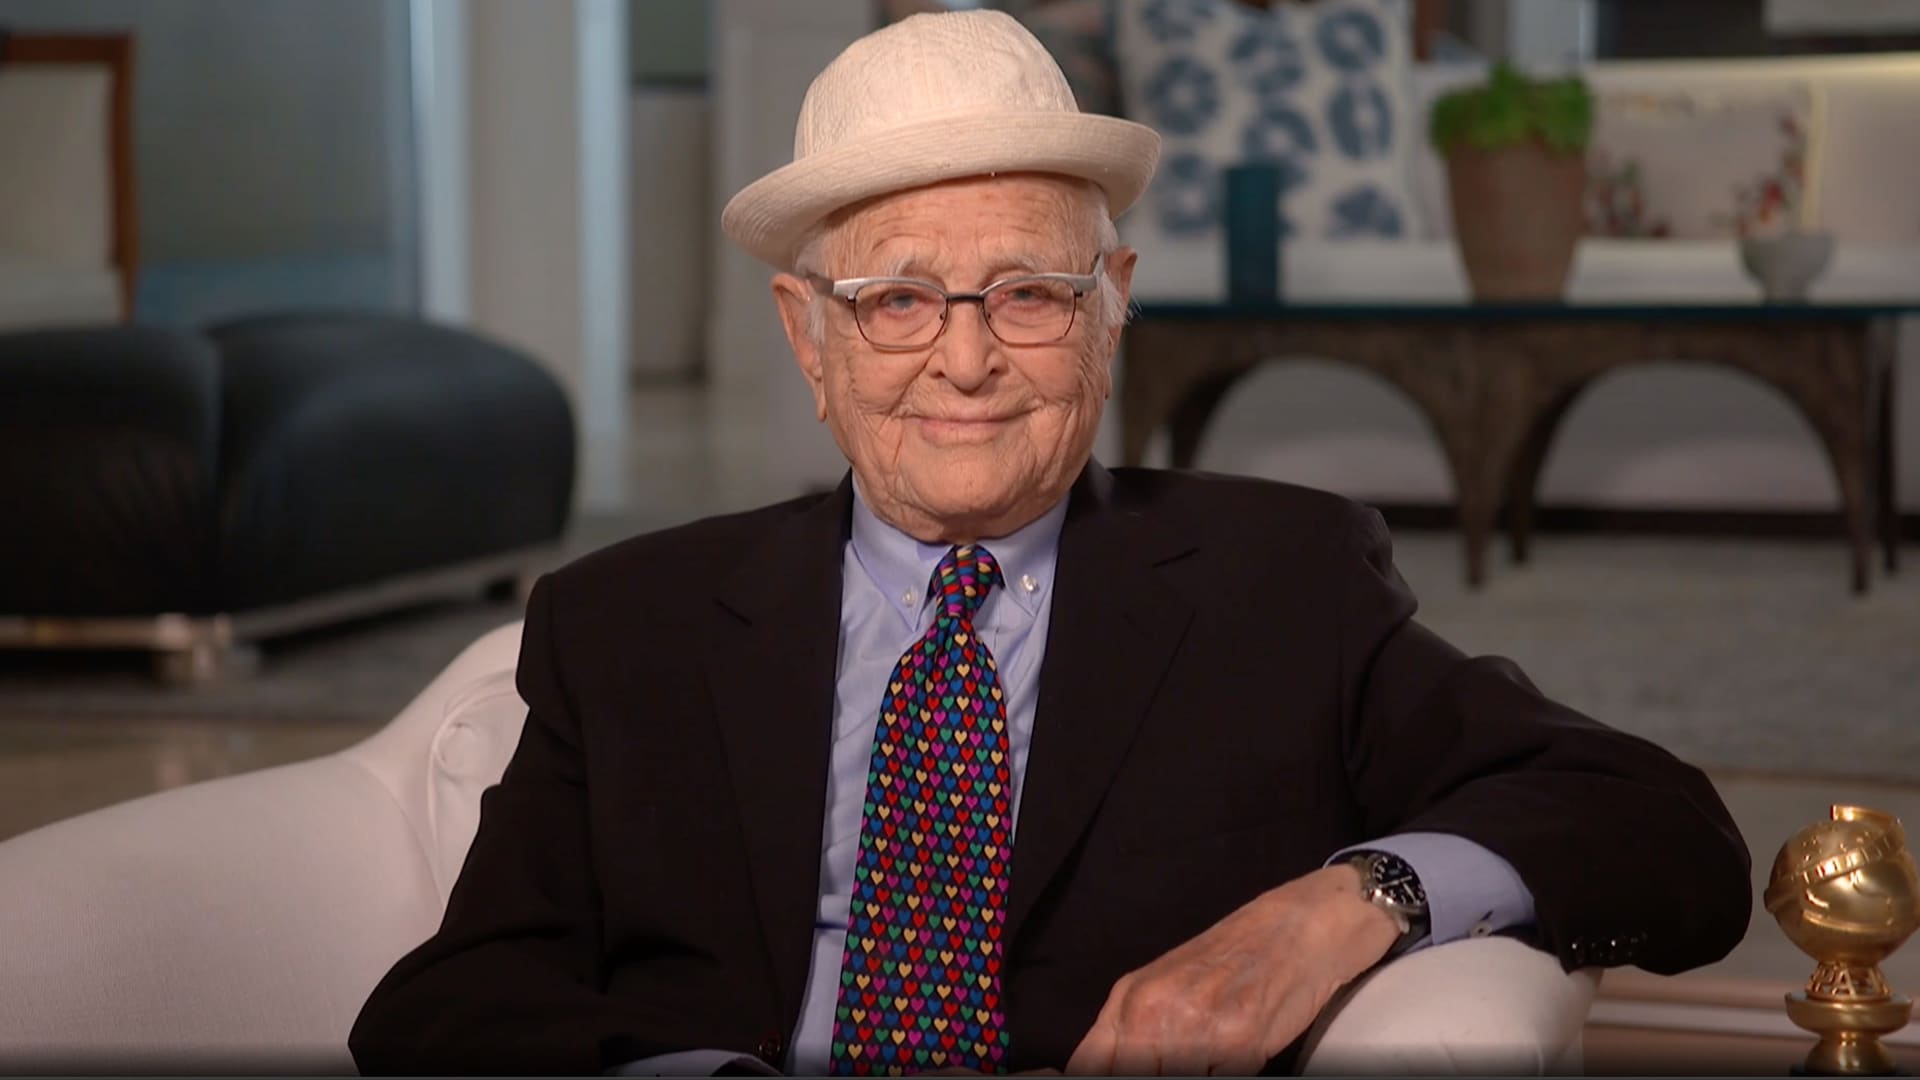 Norman Lear, winner of the Carol Burnett Award, speaks during the 78th Annual Golden Globe Awards broadcast on February 28, 2021. --(Photo by NBC/NBCU Photo Bank via Getty Images)